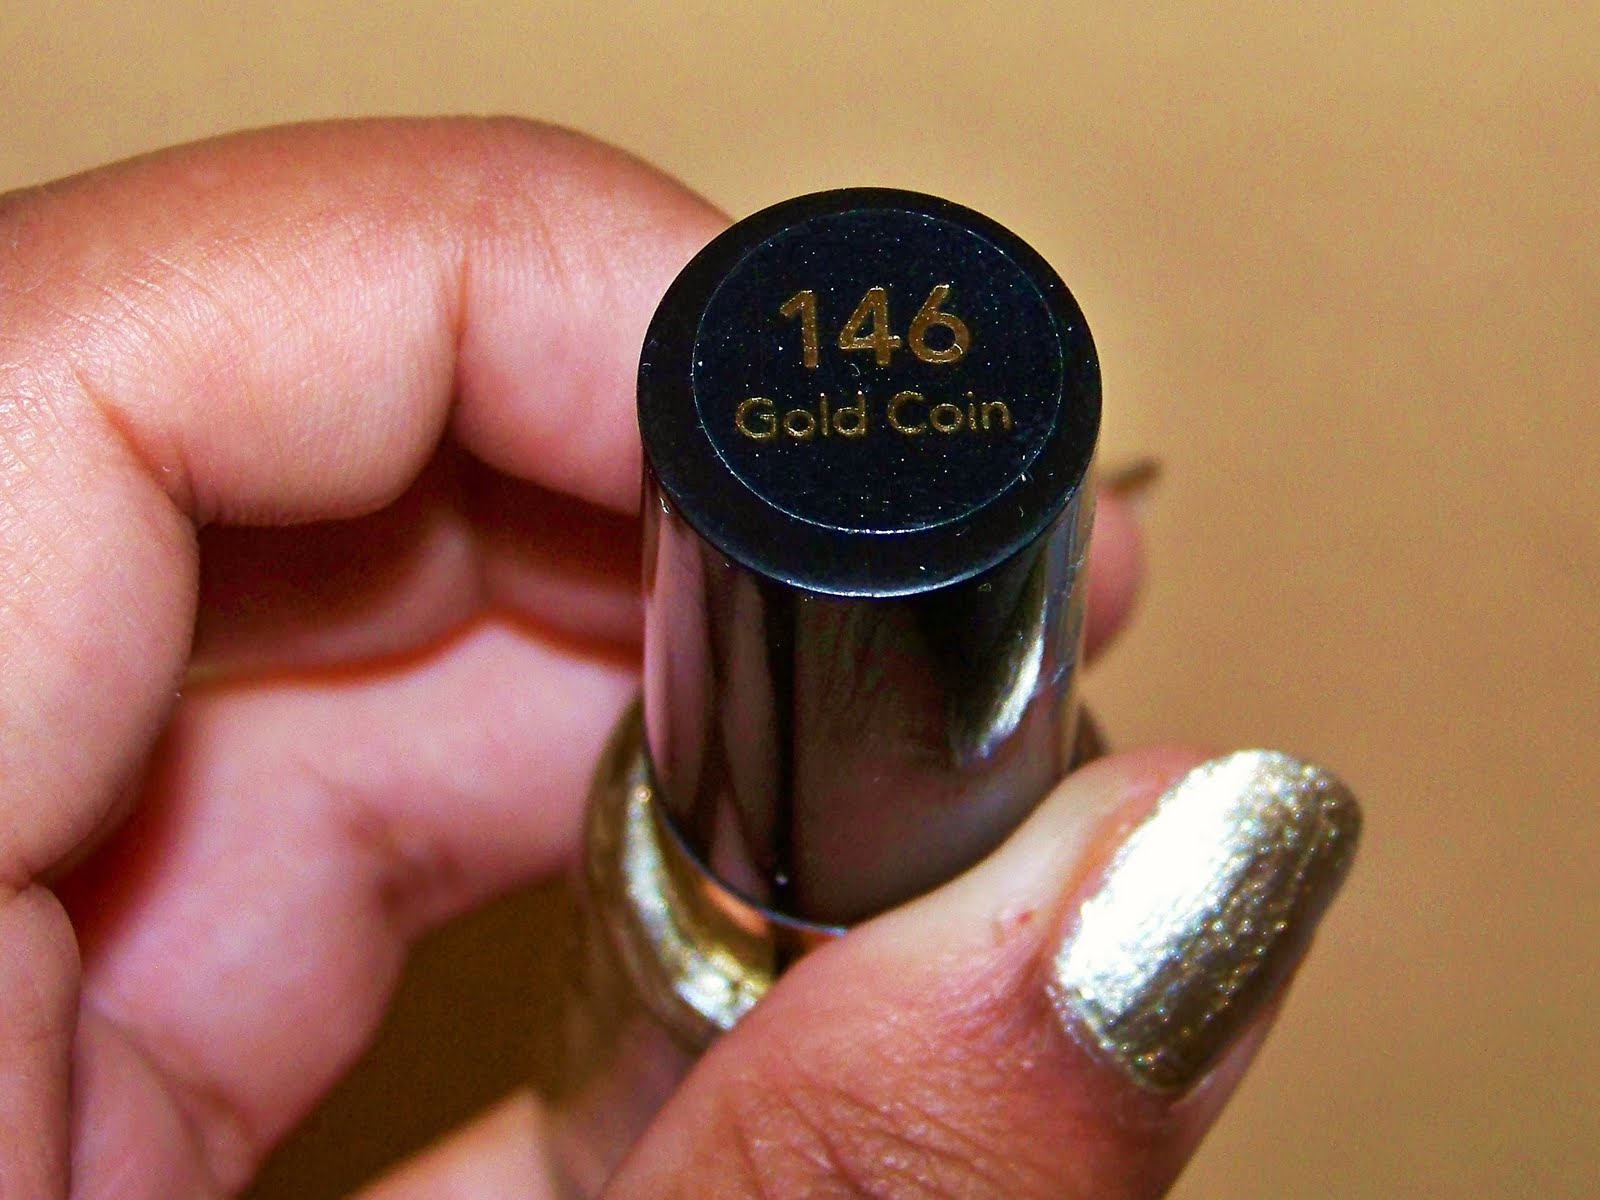 4. "Revlon Gold Coin Nail Polish Swatch and Review" - wide 1